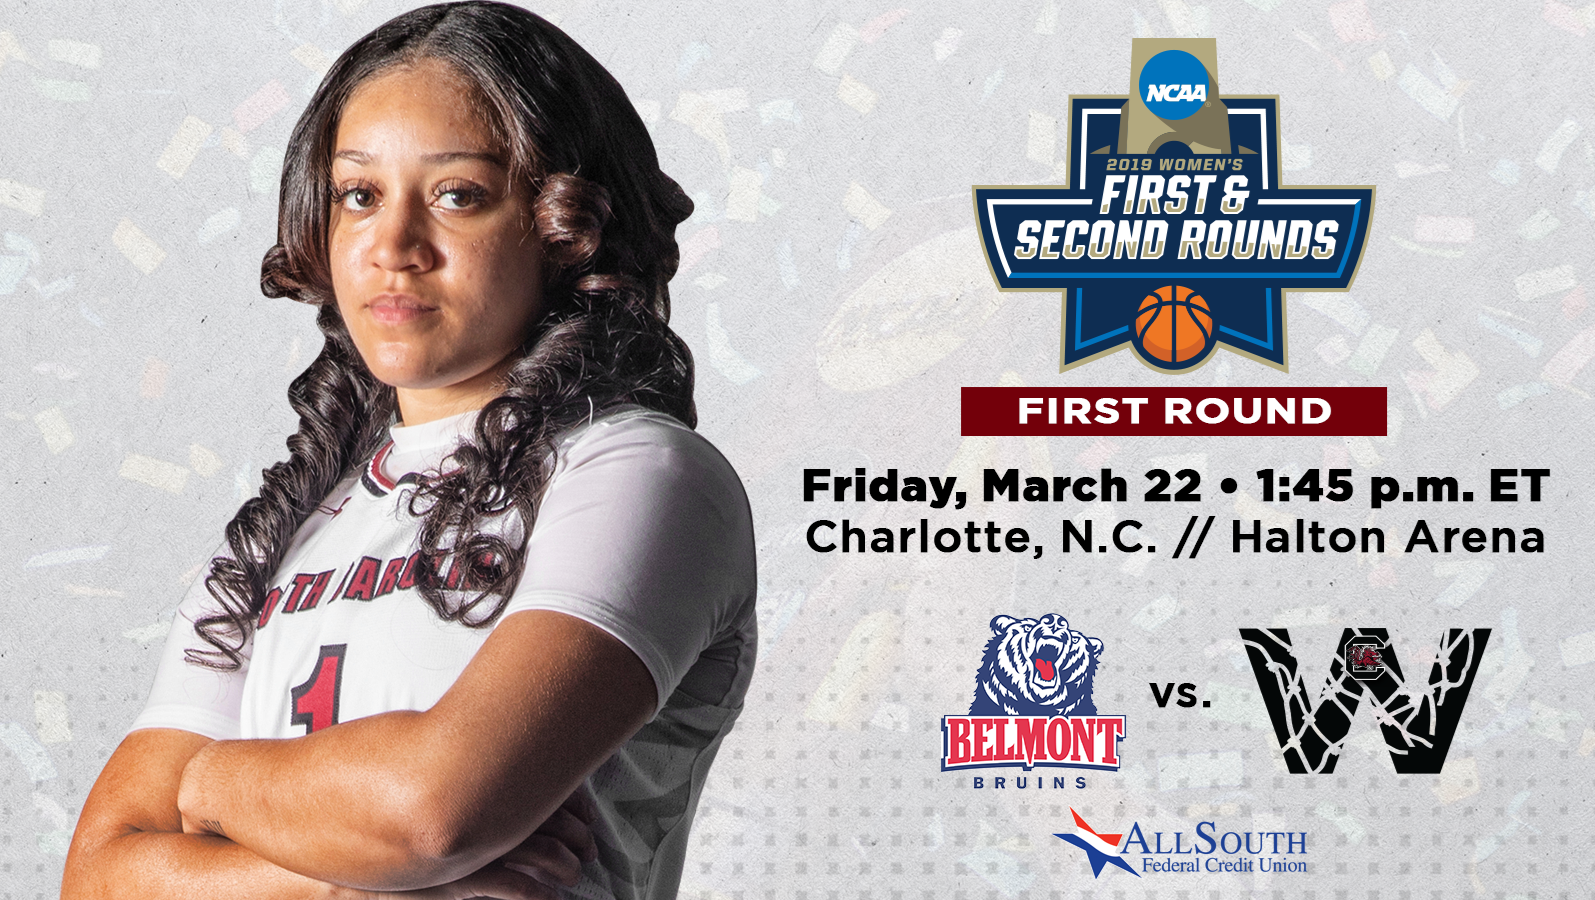 Gamecocks Open NCAA Tournament with Belmont